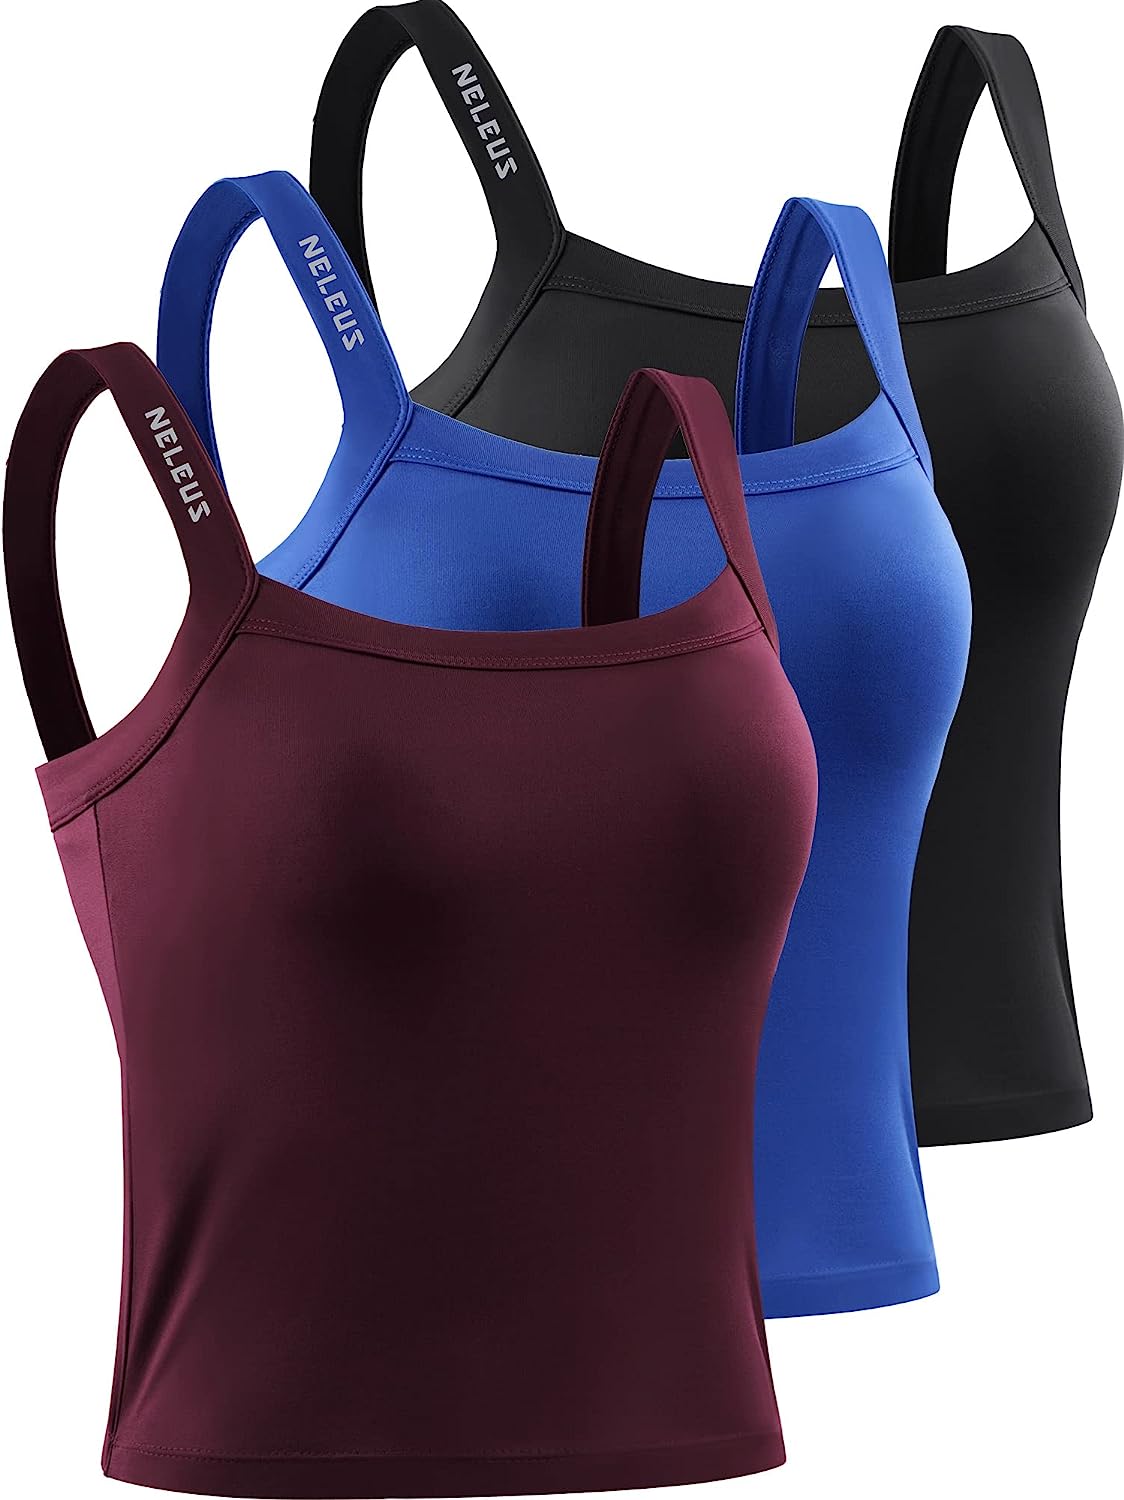 NELEUS Women's 3 Pack Athletic Compression Tank Top with Sport Bra